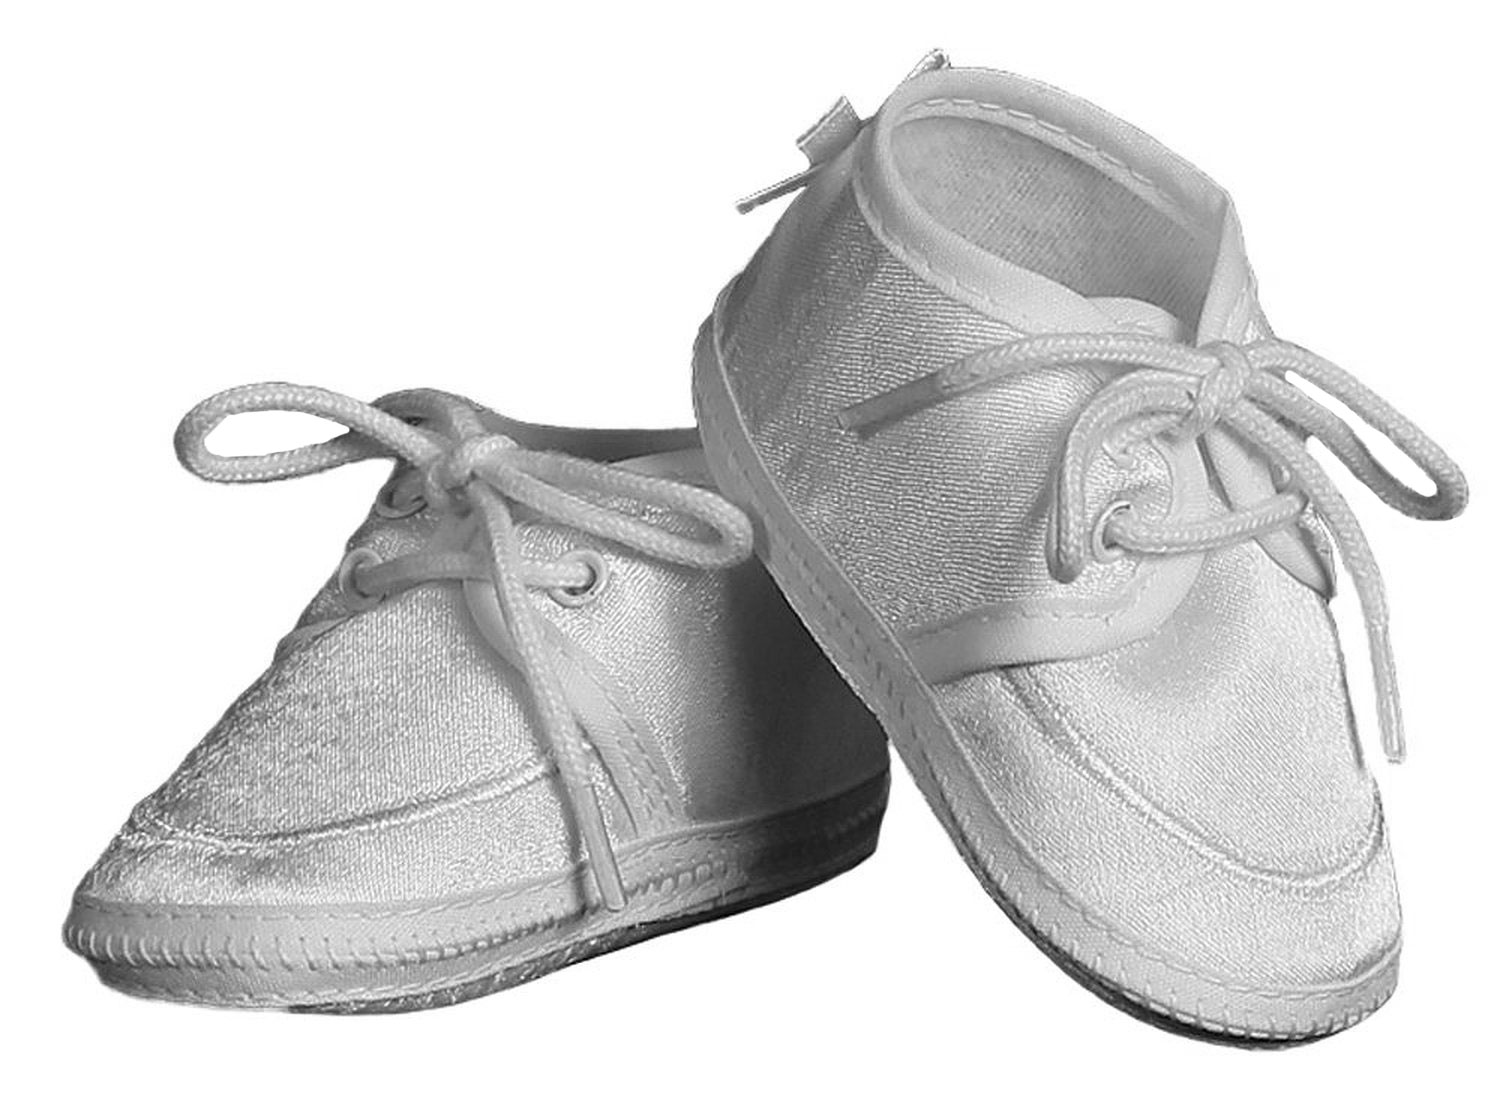 Baby Boy's White Satin Oxford Lace-up Bootie Crib Shoe